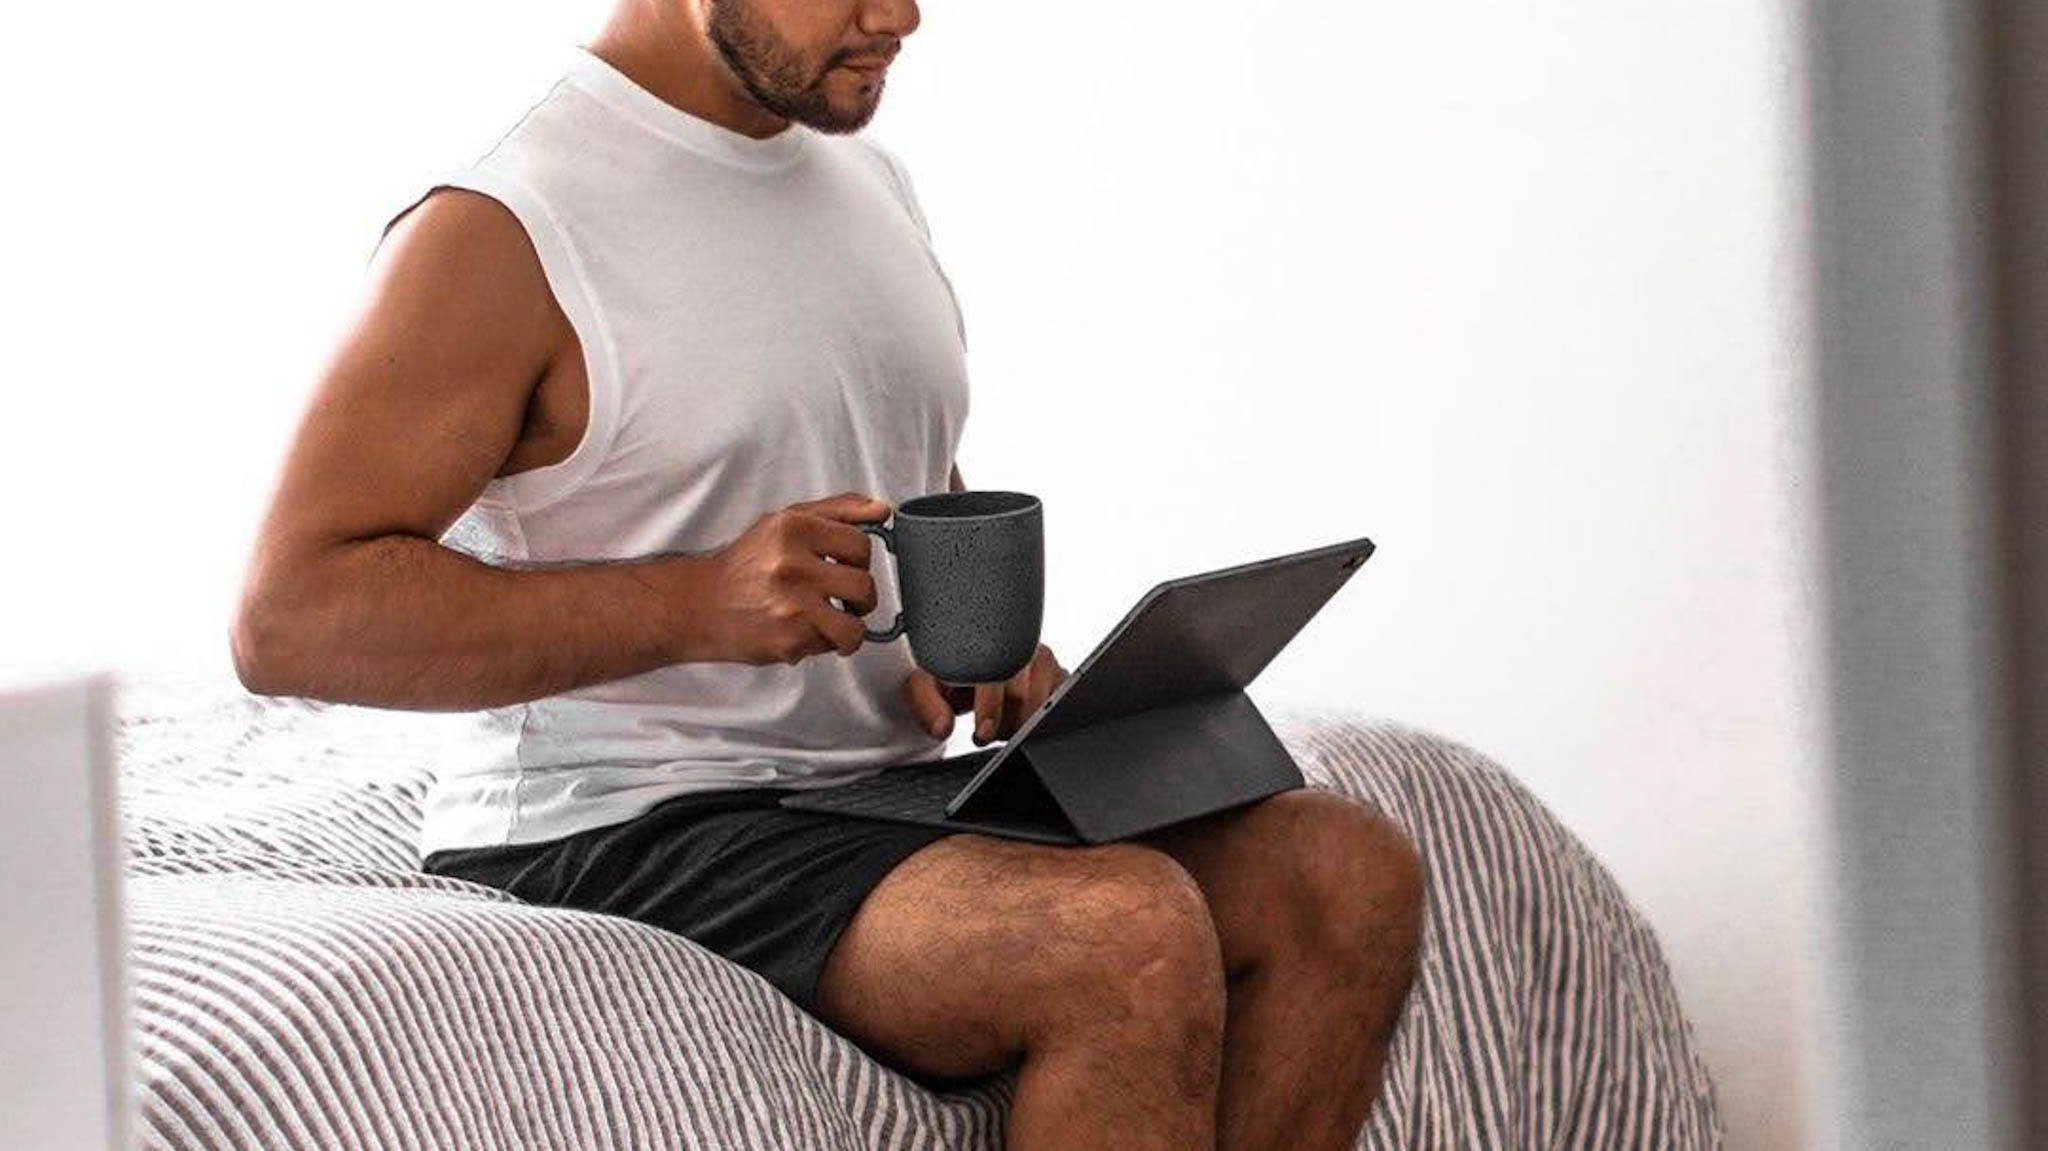 Man in shorts working from home - man holding coffee in bed - man with iPad in bed